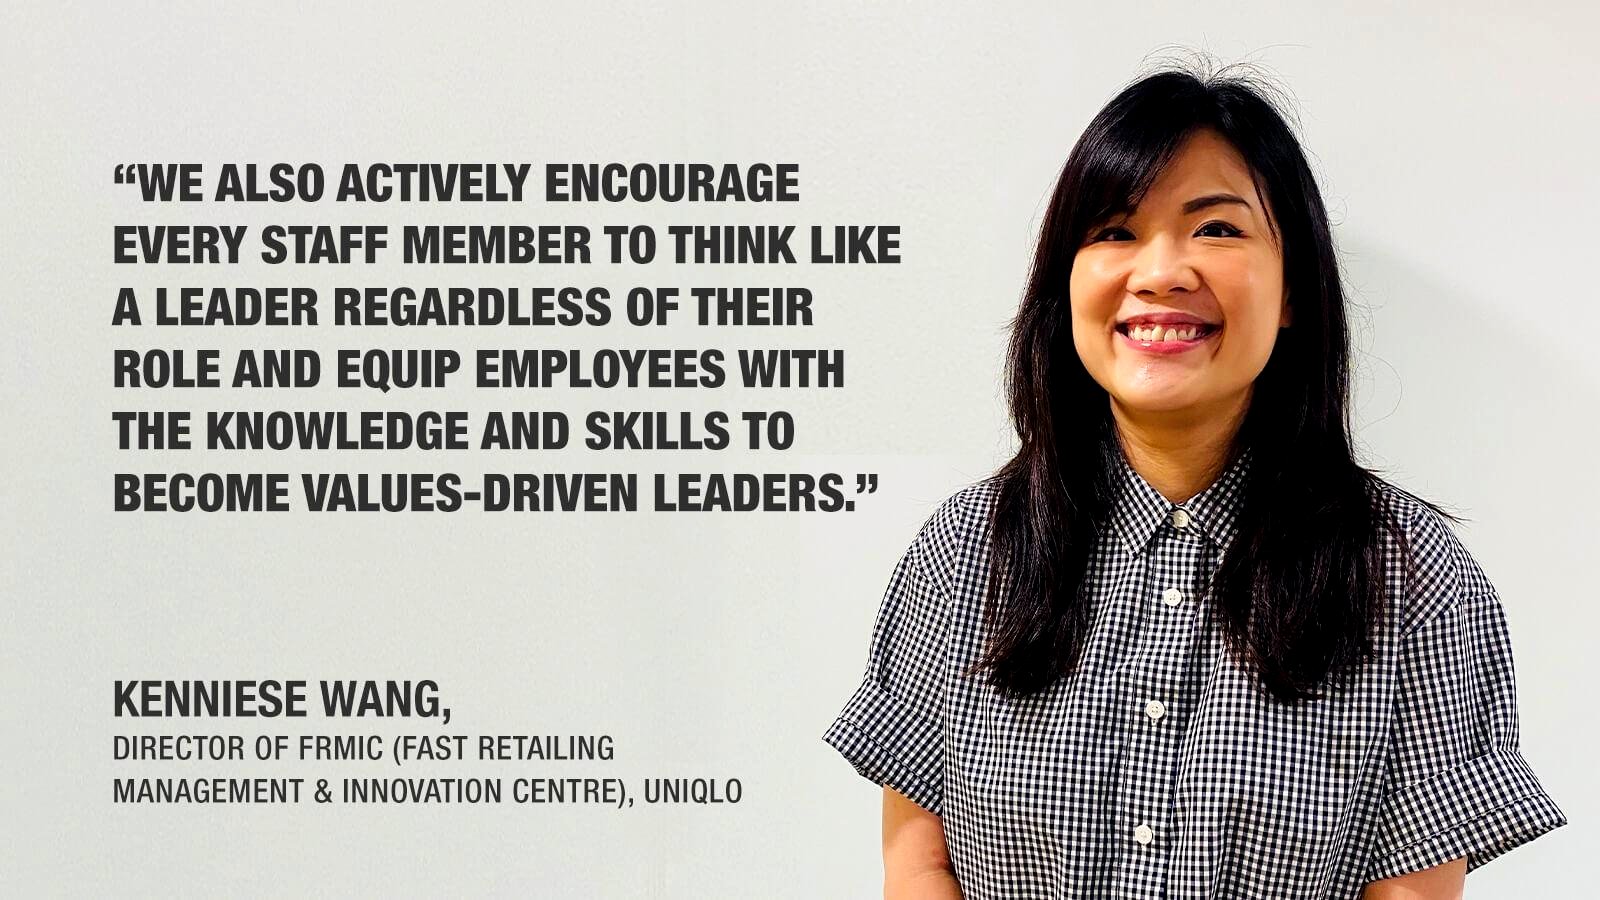 Case study: Why UNIQLO Singapore believes one size doesn't fit all when it comes to employee engagement strategies